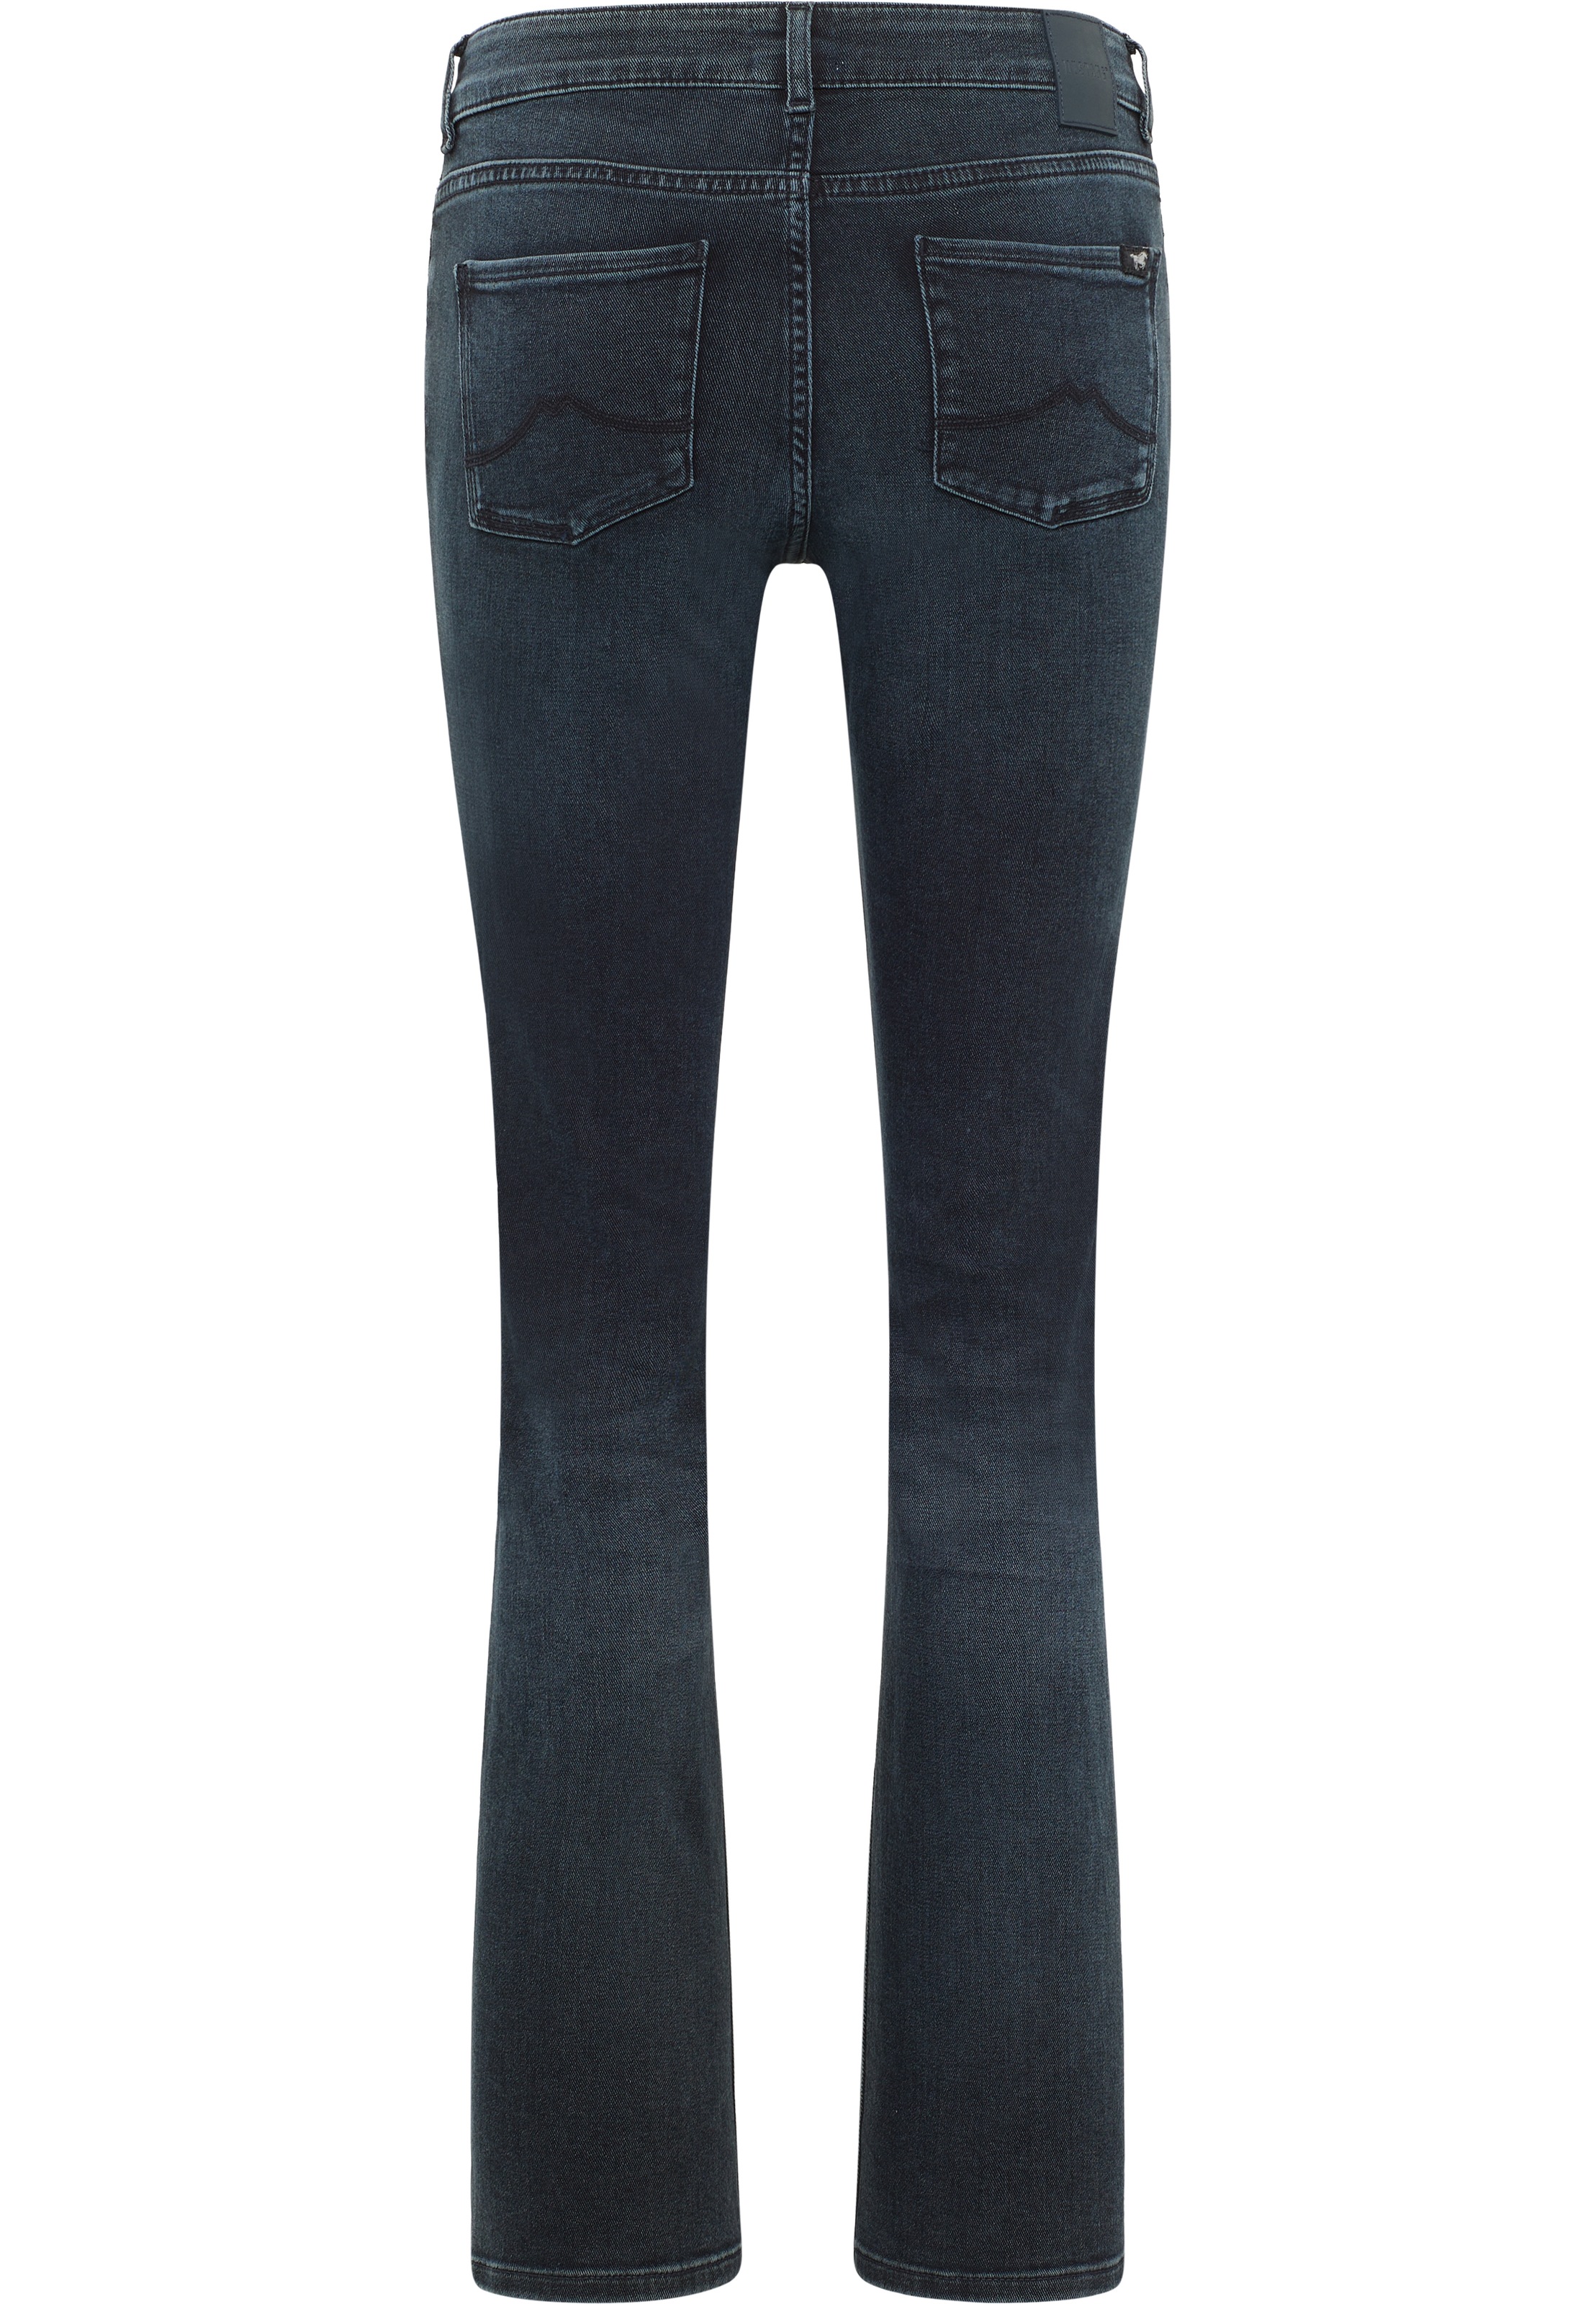 OTTO Crosby Shop MUSTANG im Relaxed »Style kaufen Straight« Straight-Jeans Online